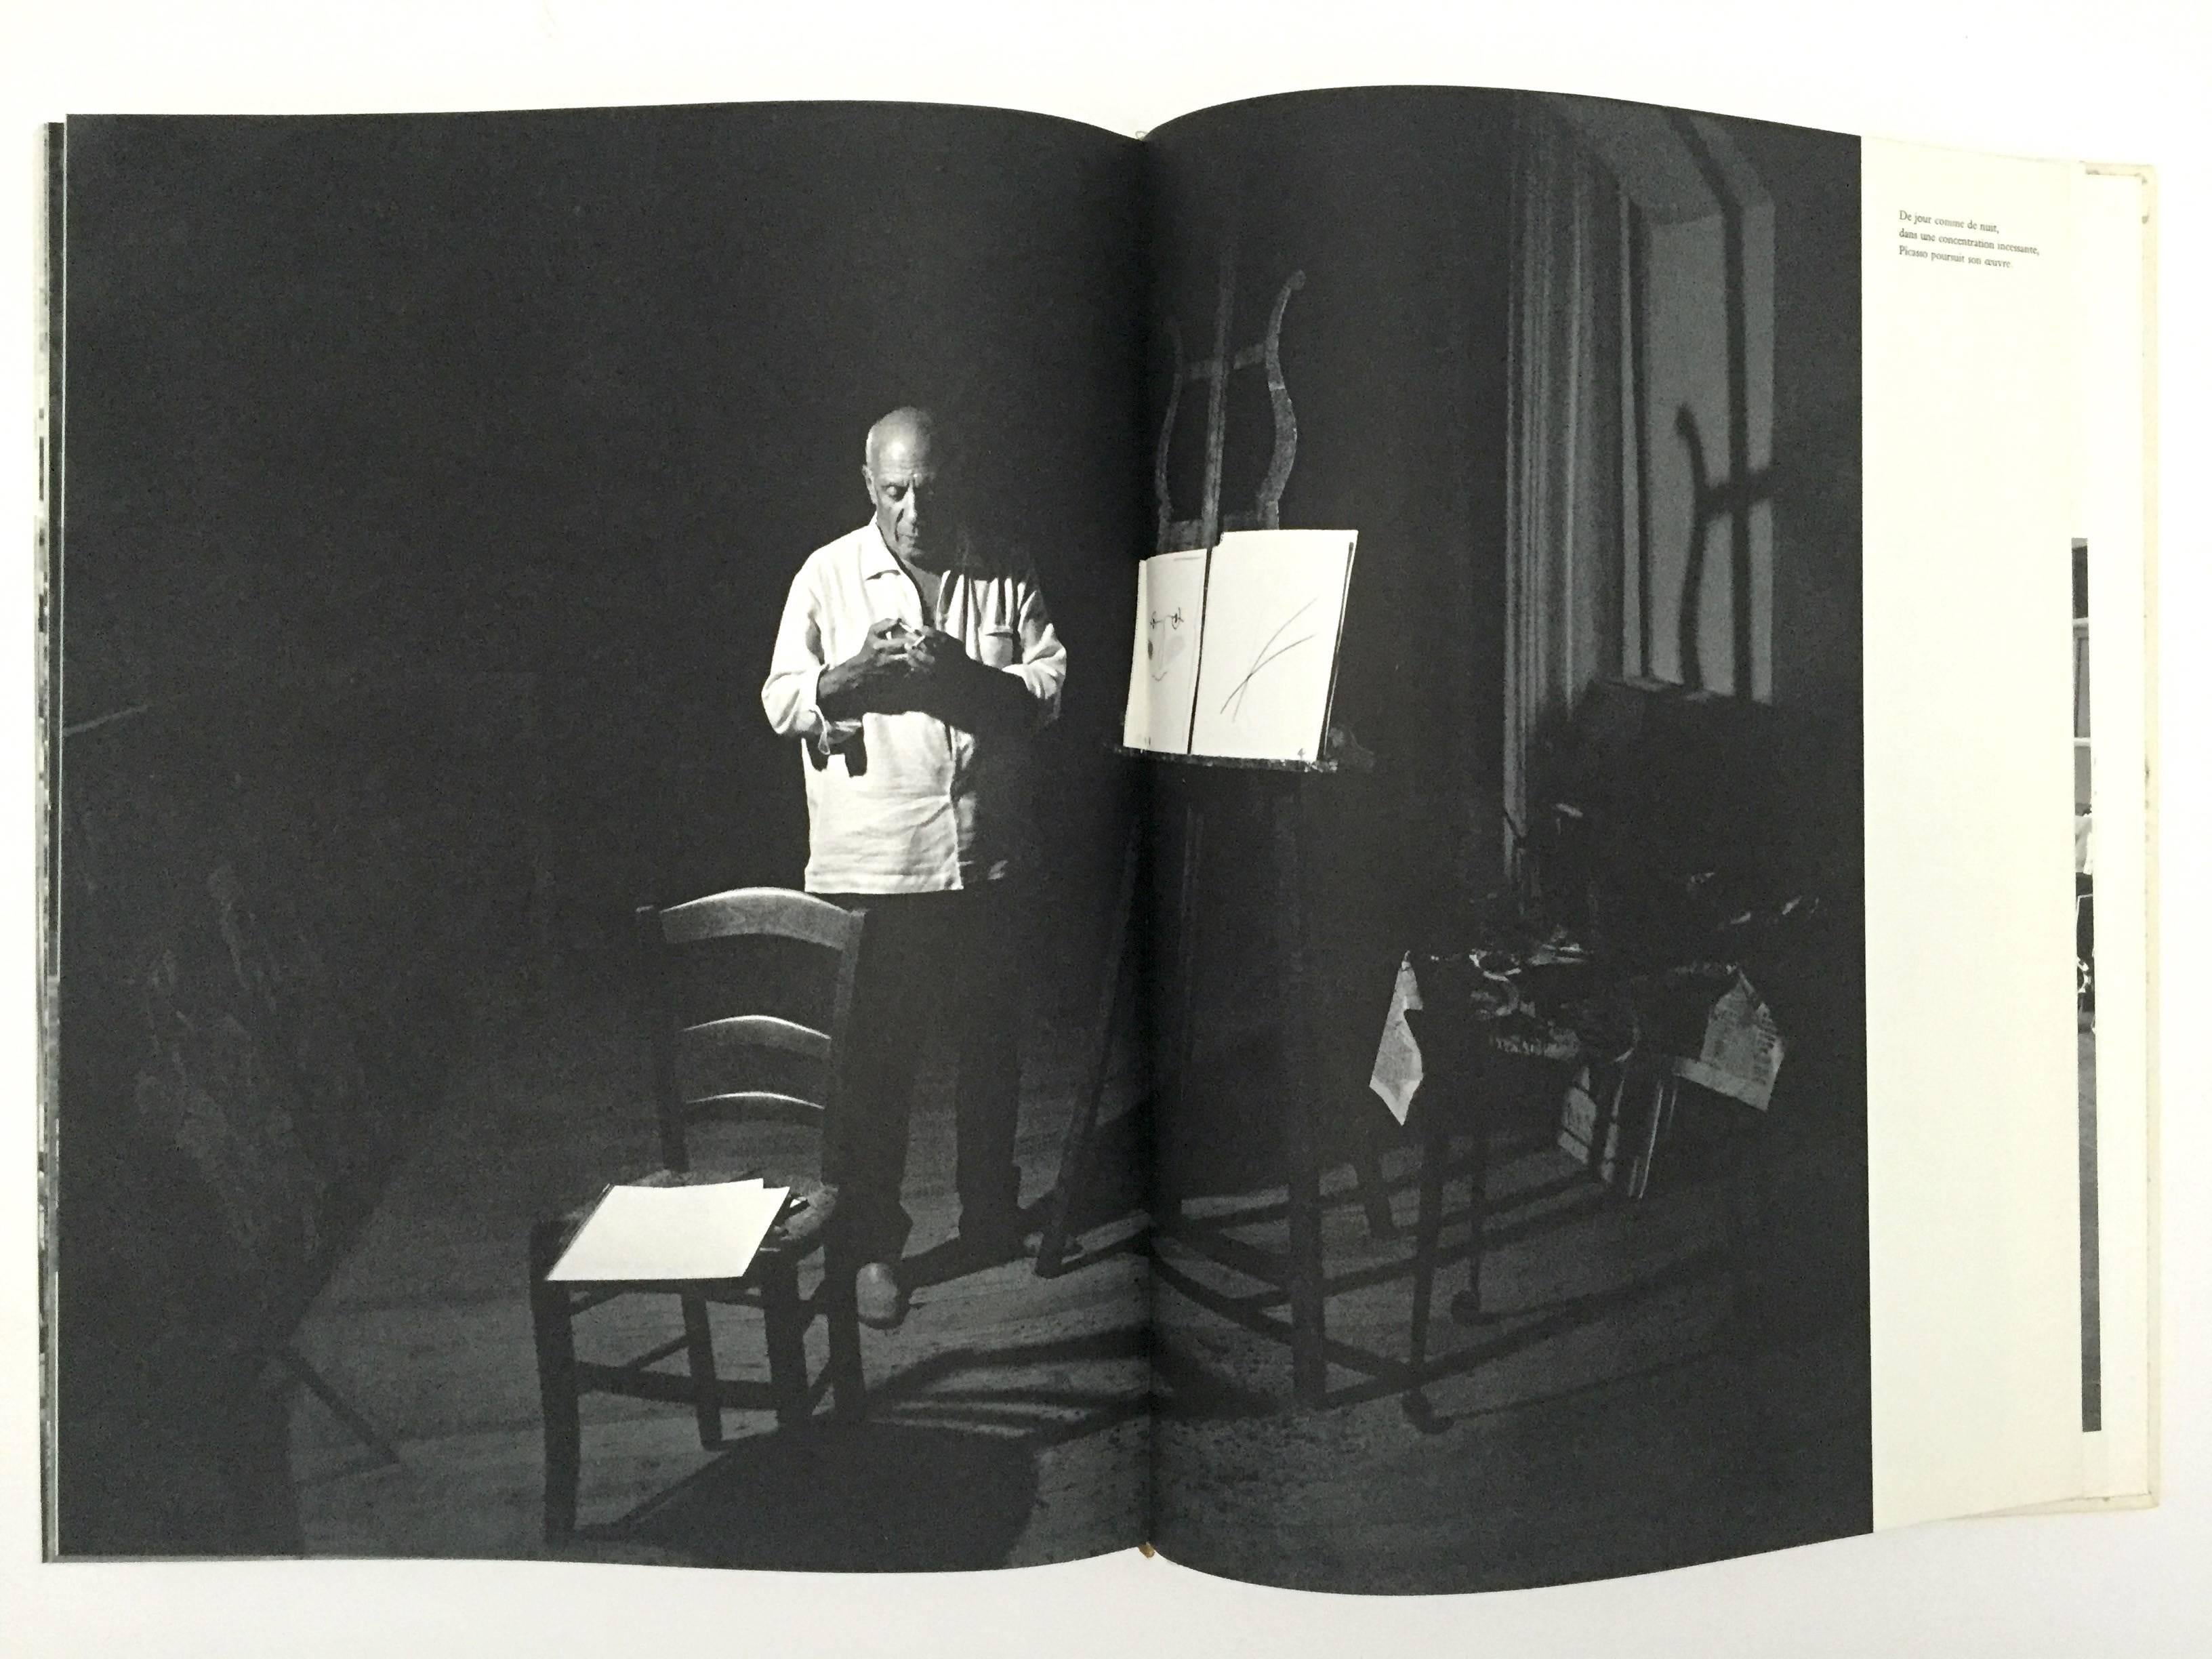 Published by Manesse-Verlag, 1965.

An intimate photographic biography- or diary, created by Edward Quinn. Illustrated majorly in black and white, with some colour plates, the photographs vary between Picasso working and relaxing, to his finished